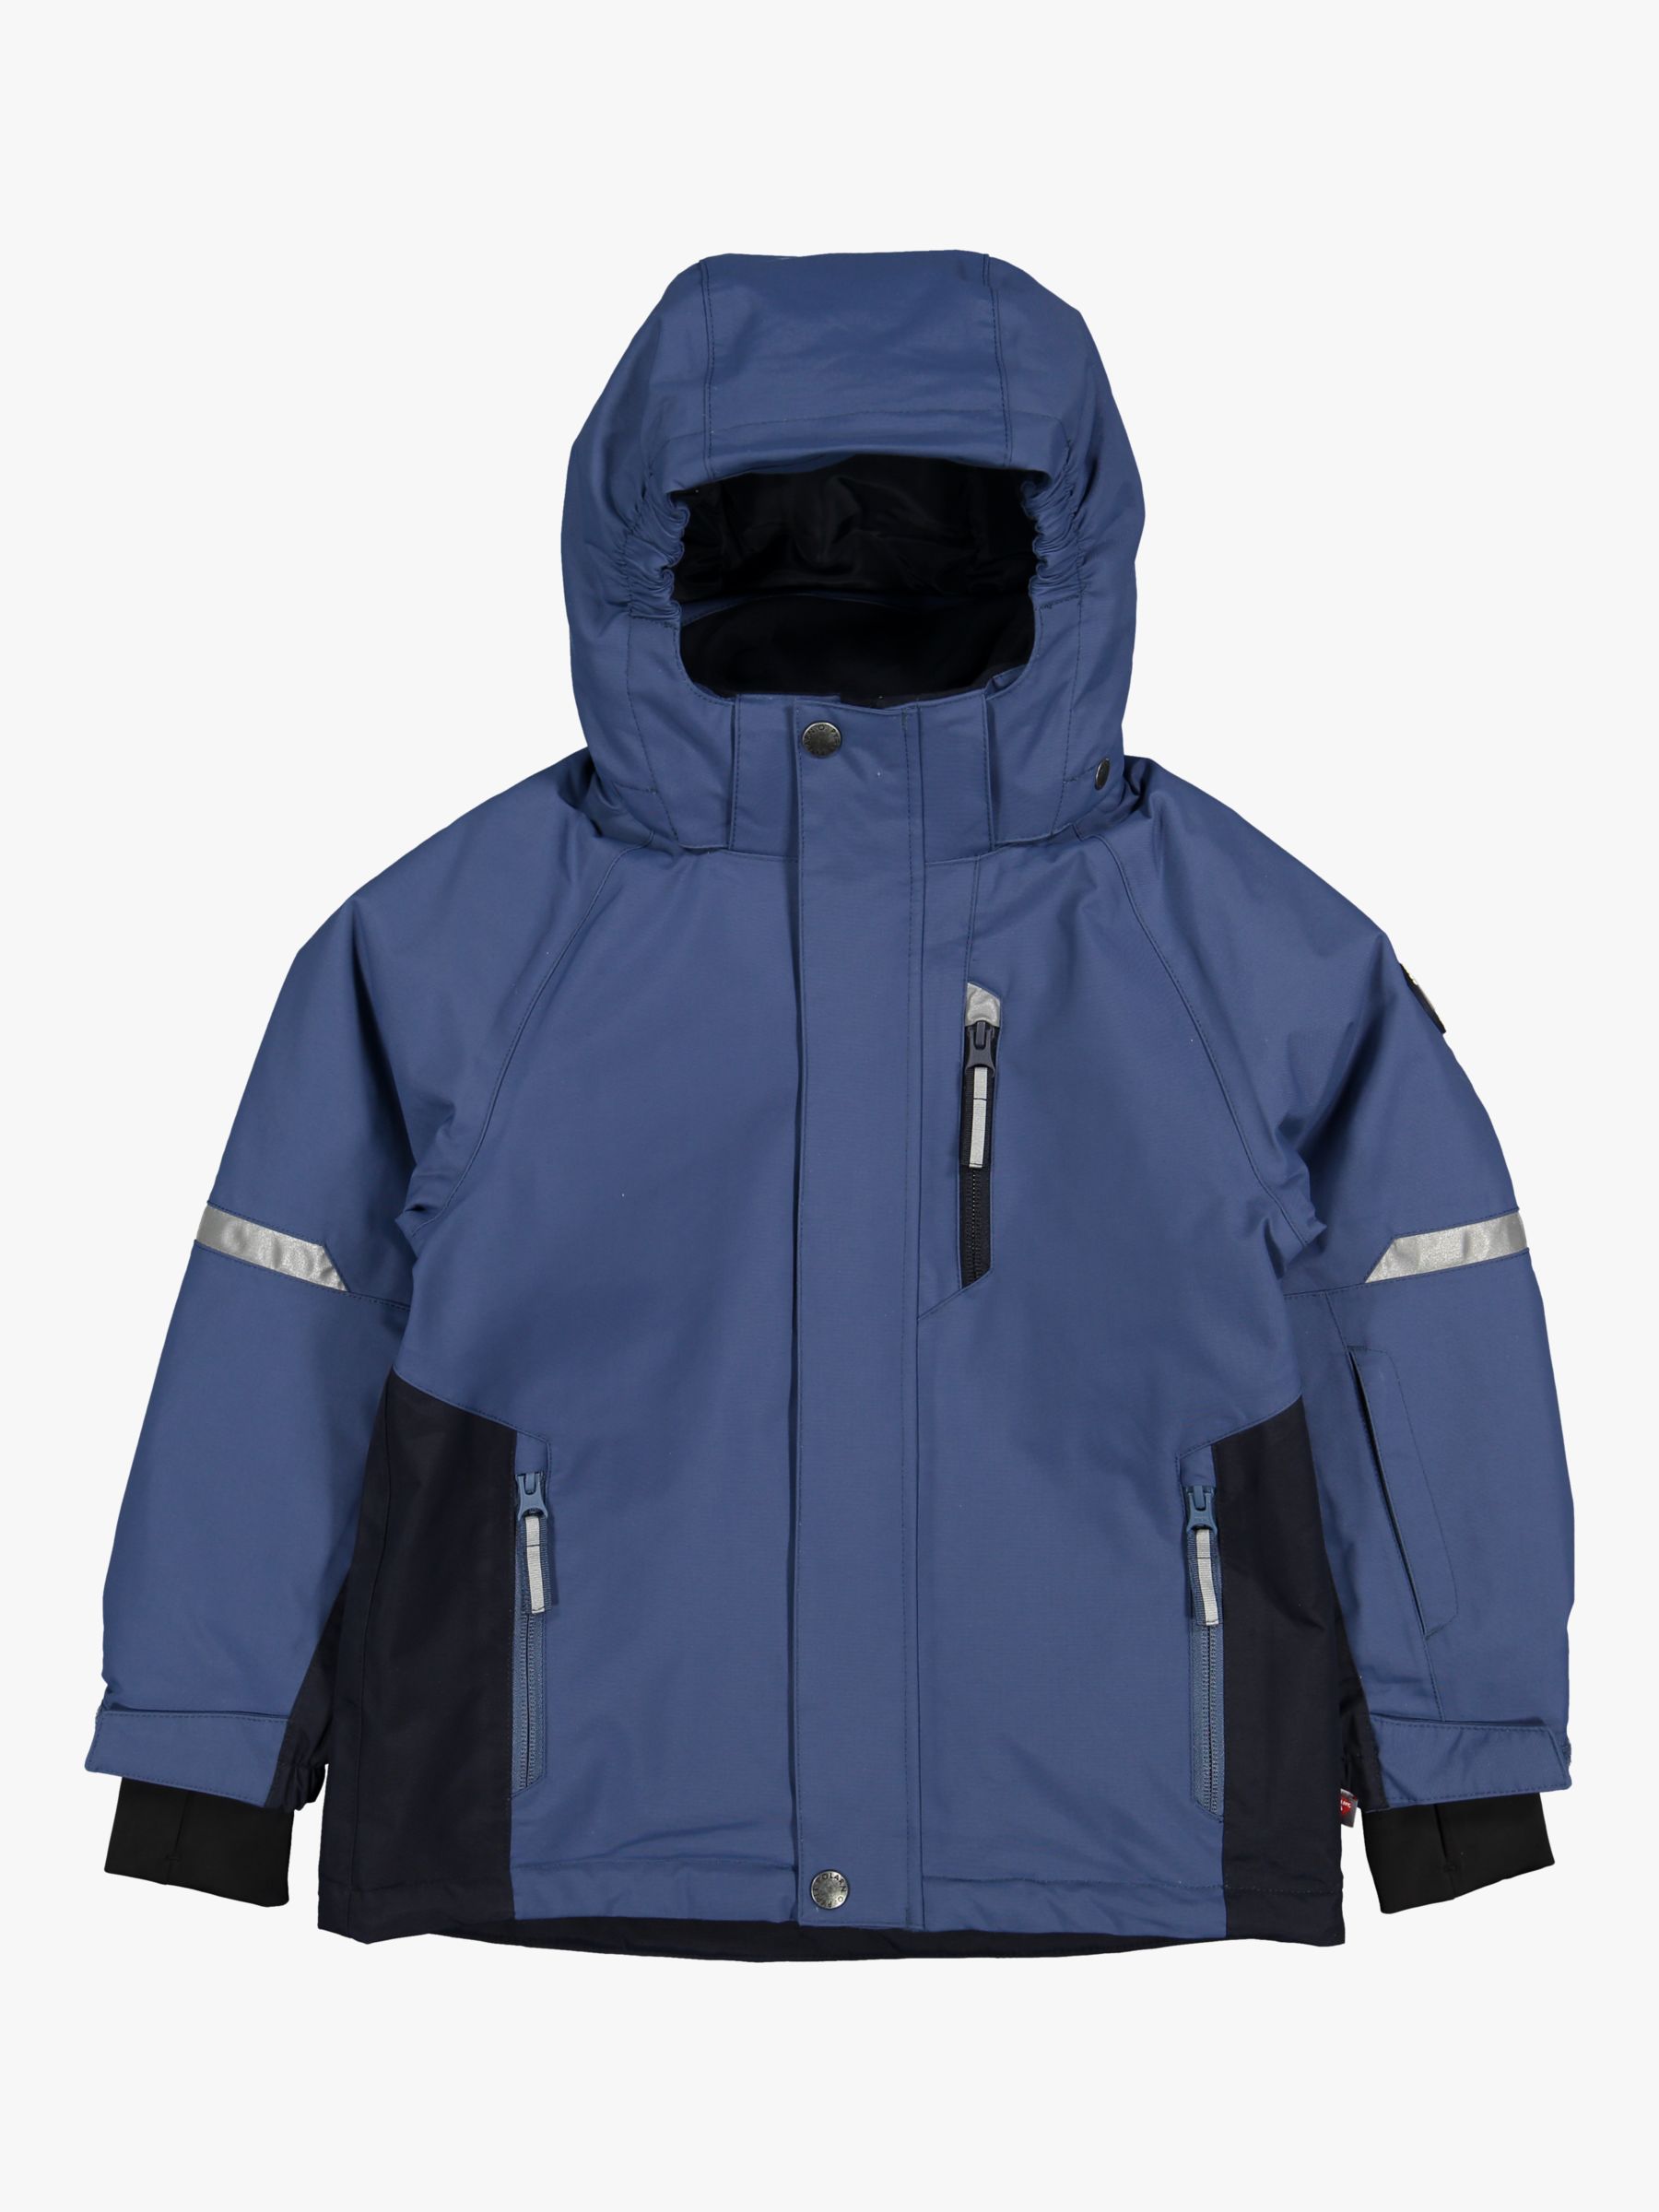 Image of Polarn O Pyret Childrens Waterproof Padded Coat Ensign Blue